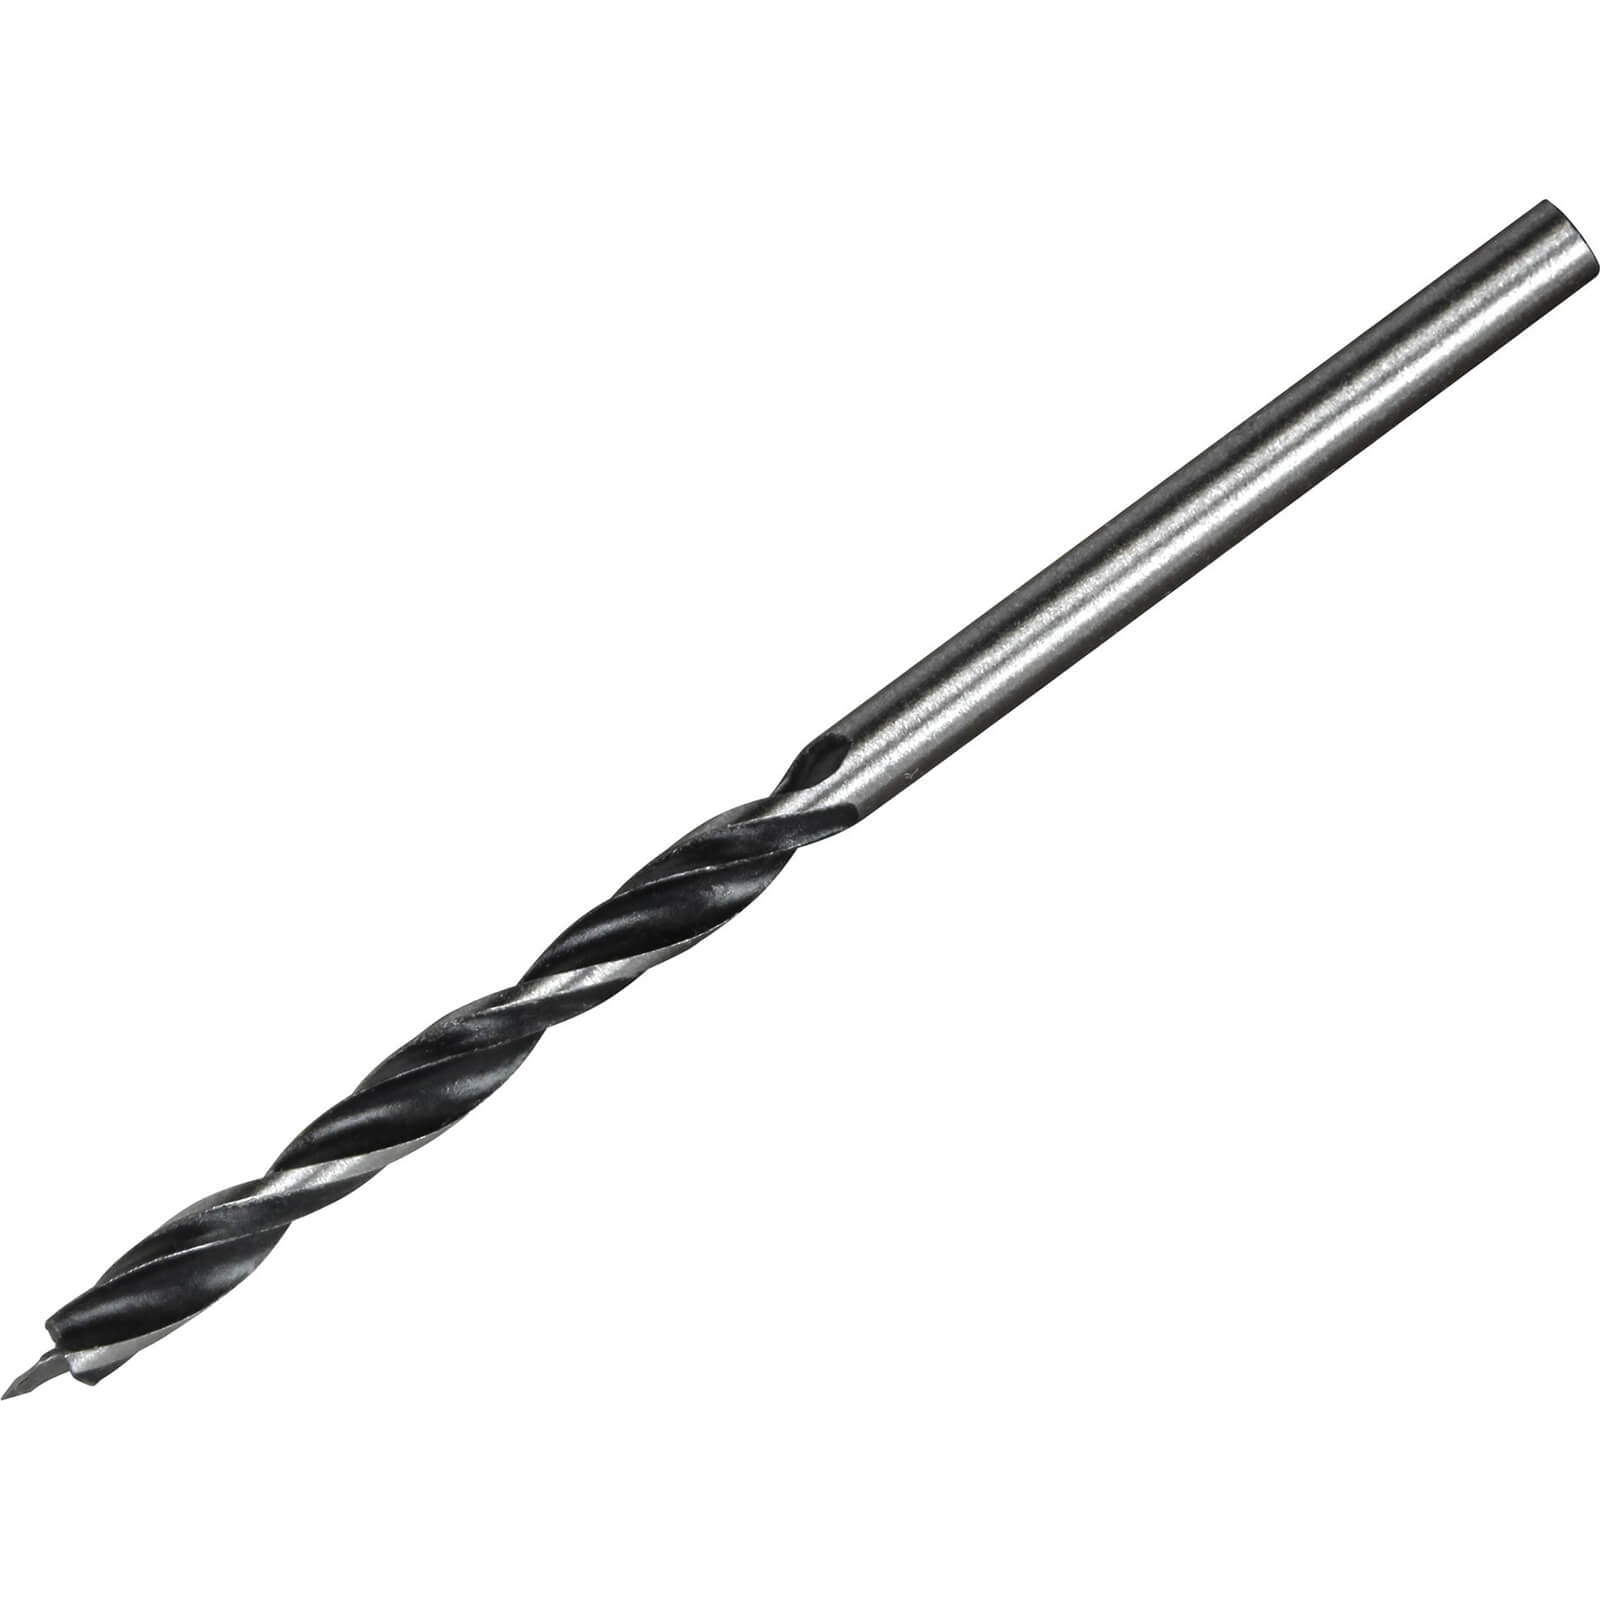 Image of Faithfull Lip and Spur Wood Drill Bit 3mm